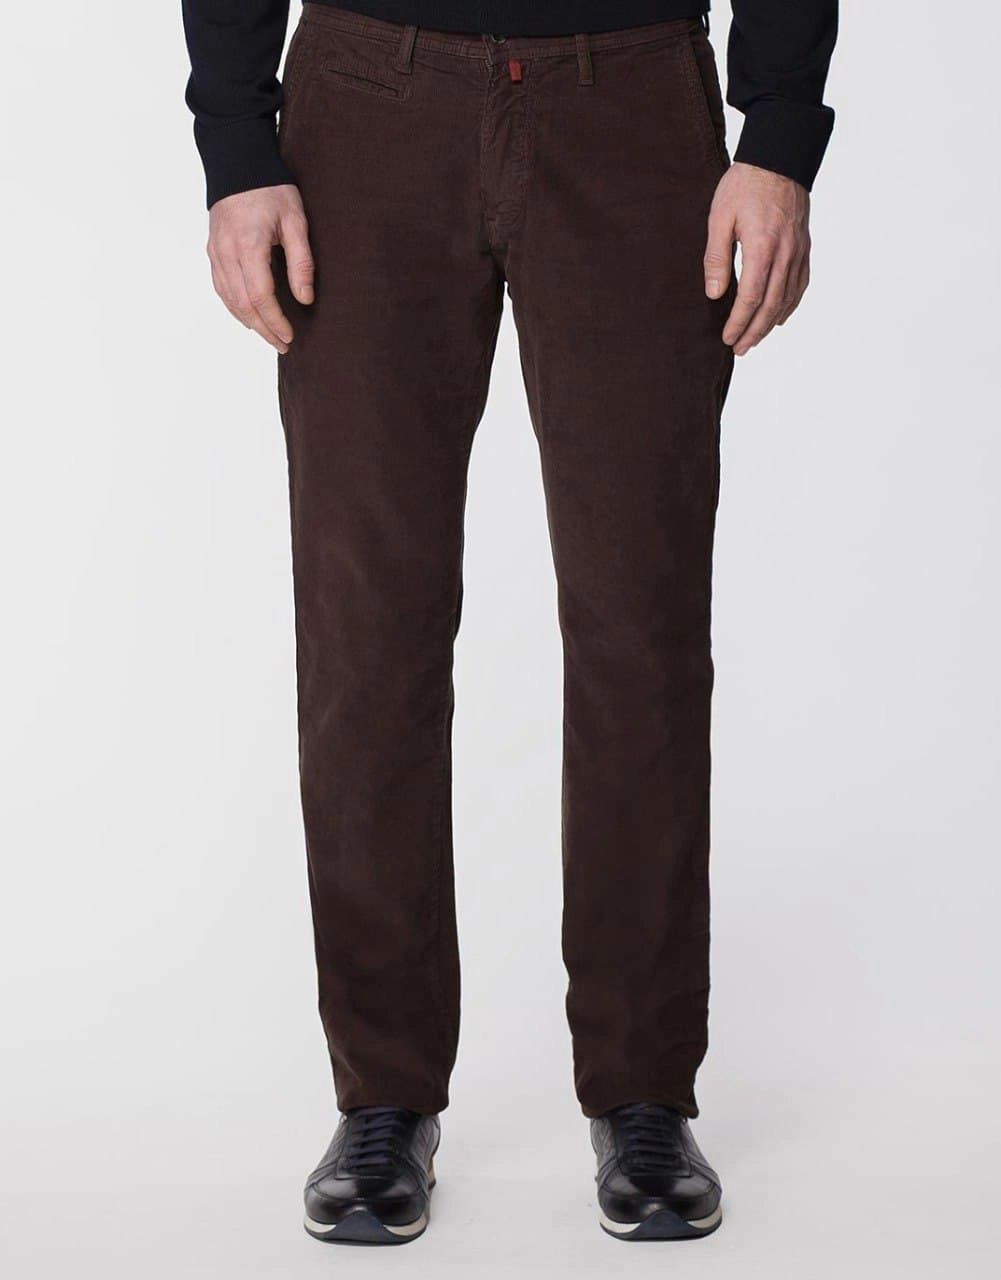 Pierre Cardin Trousers for men Welldressed for every occasion  ZALANDO